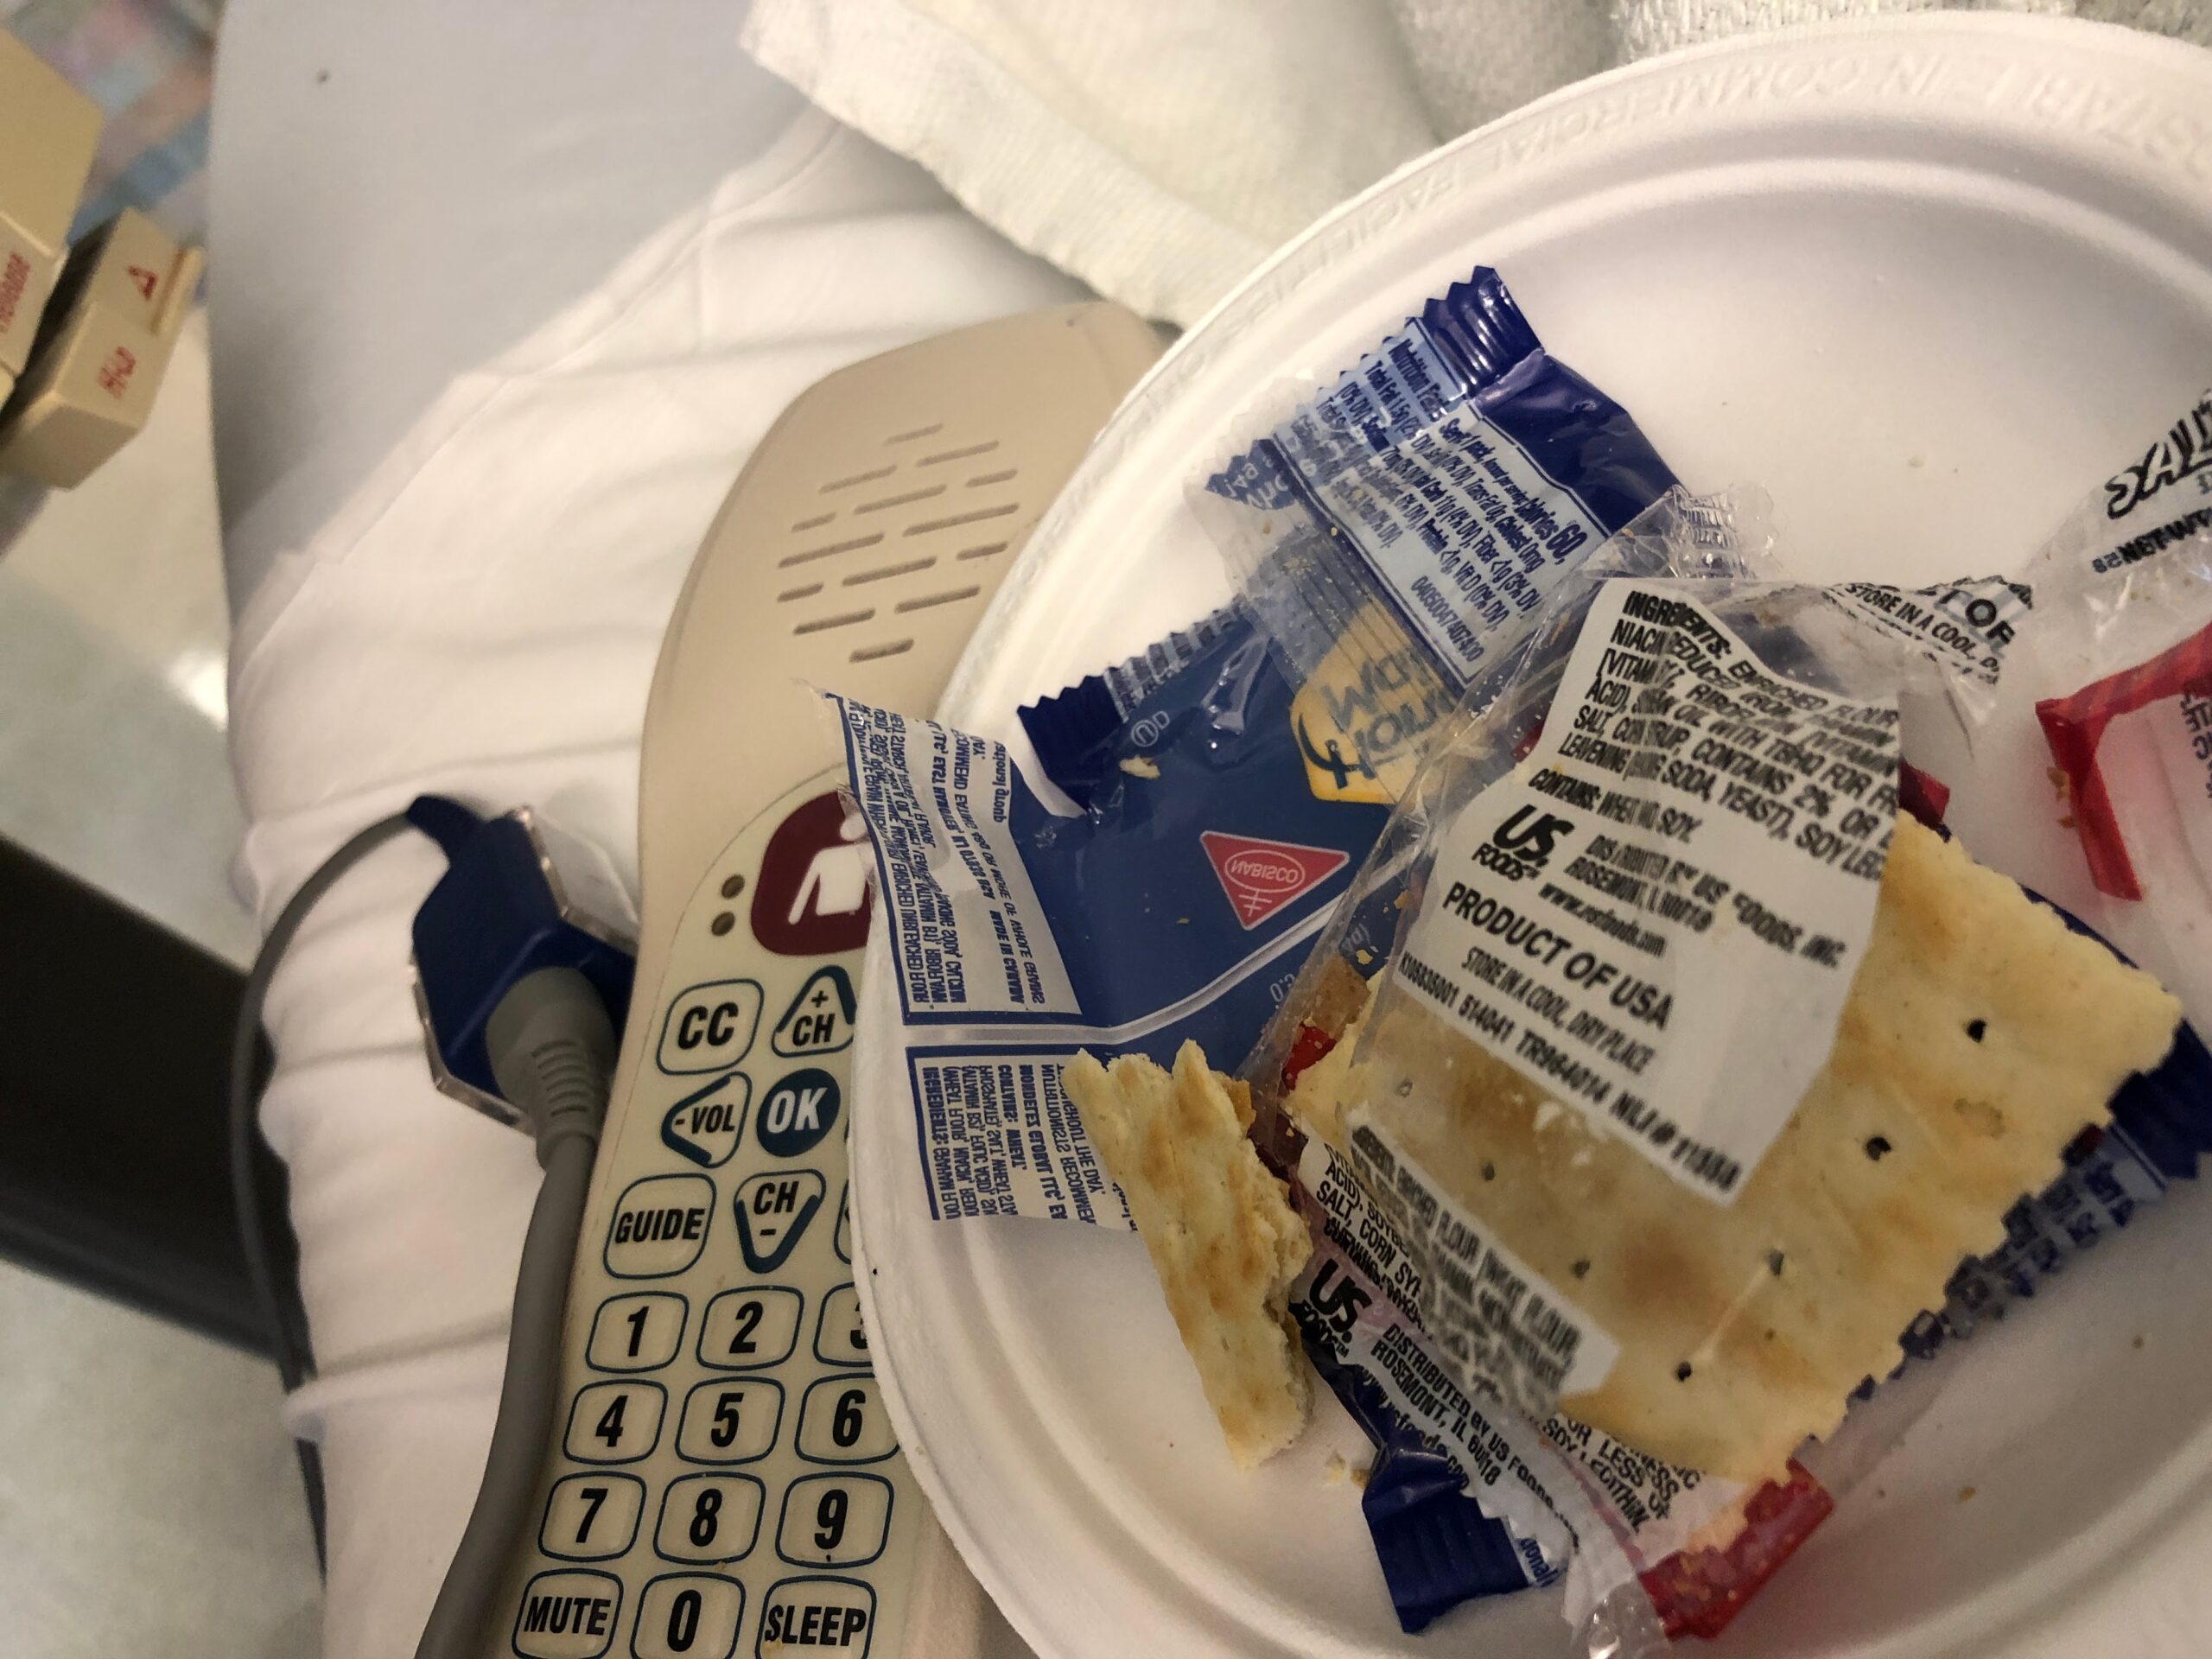 An off-center photo of a hospital bed, with a call device and a paper plate with saltine crackers.